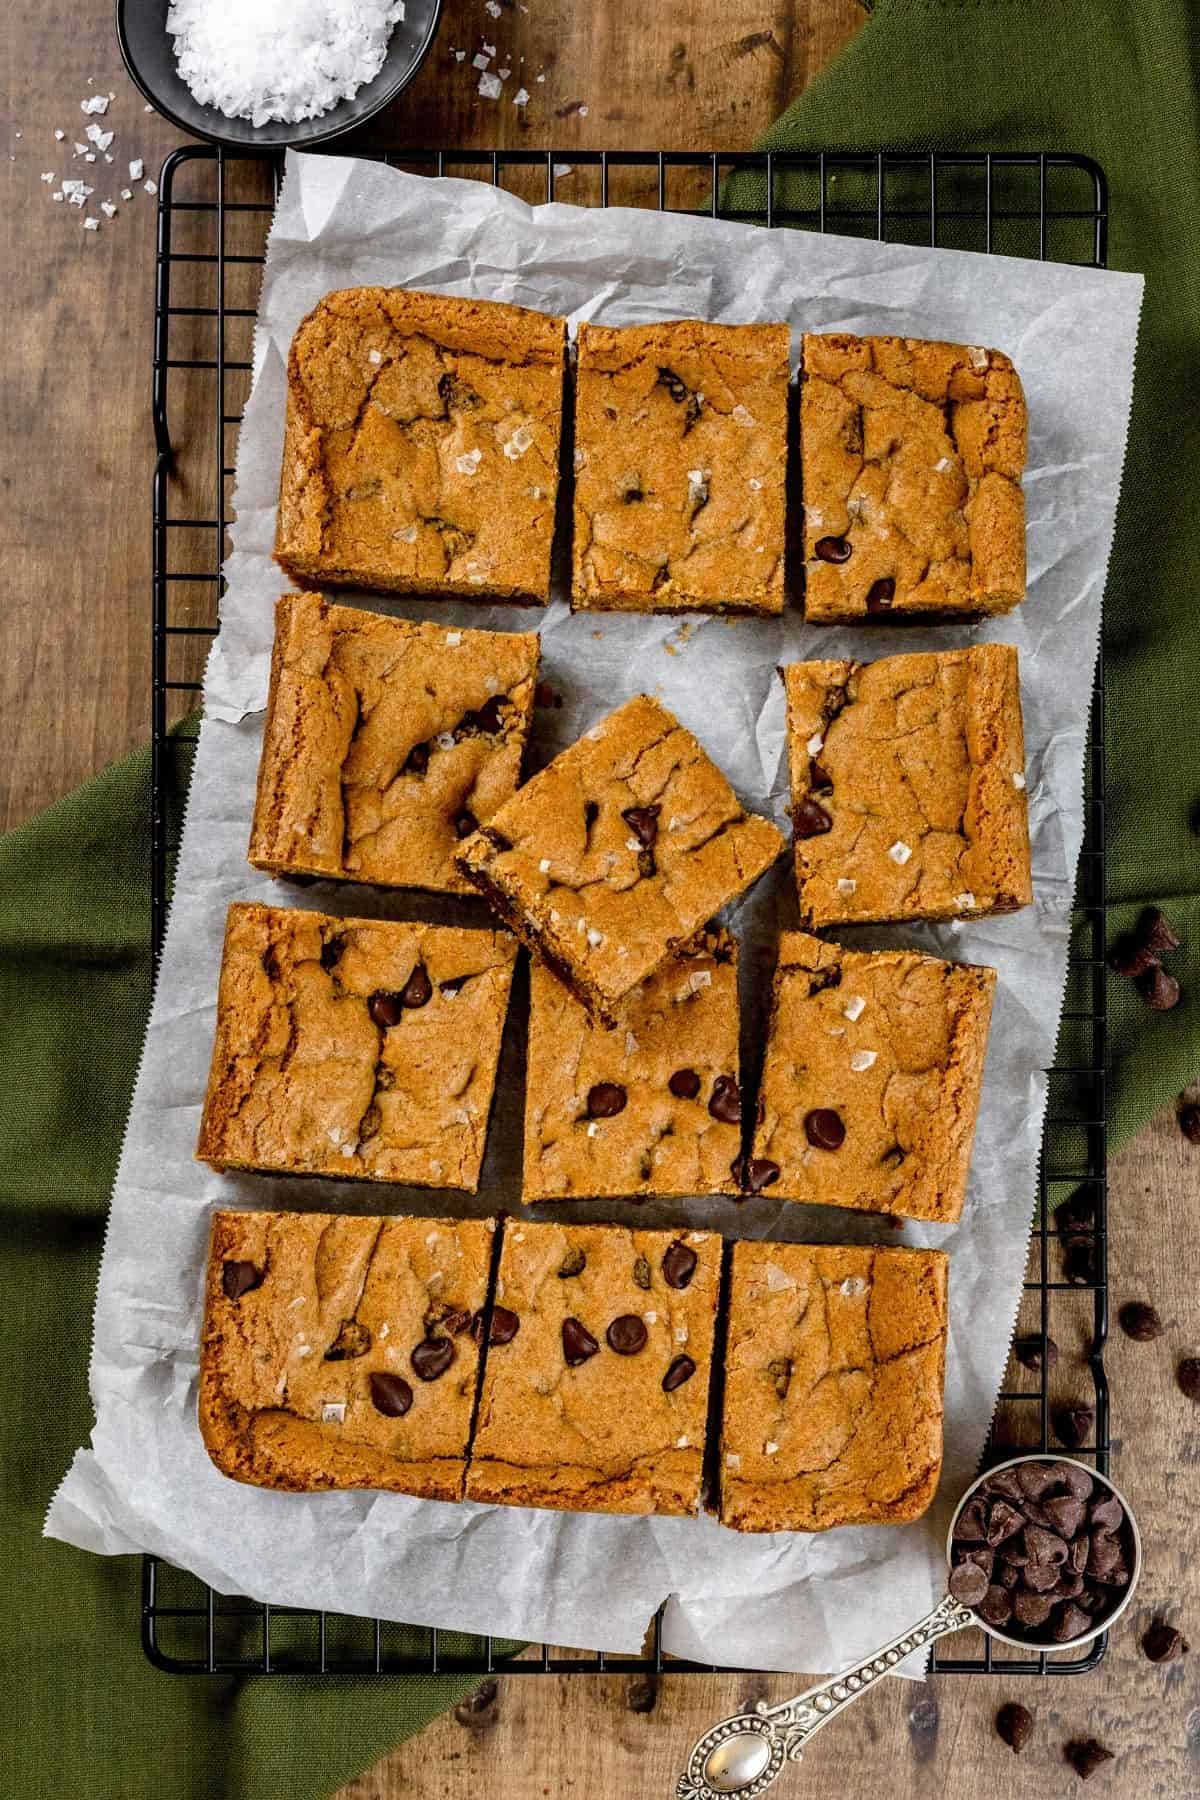 12 slices of chocolate chip bar cookies with one cookie resting on a tilt on crinkled parchment paper on a wire cooling rack with a green towel, a bowl filled with flaky sea salt, and a metal scoop filled with chocolate chips. All on a wood tabletop.